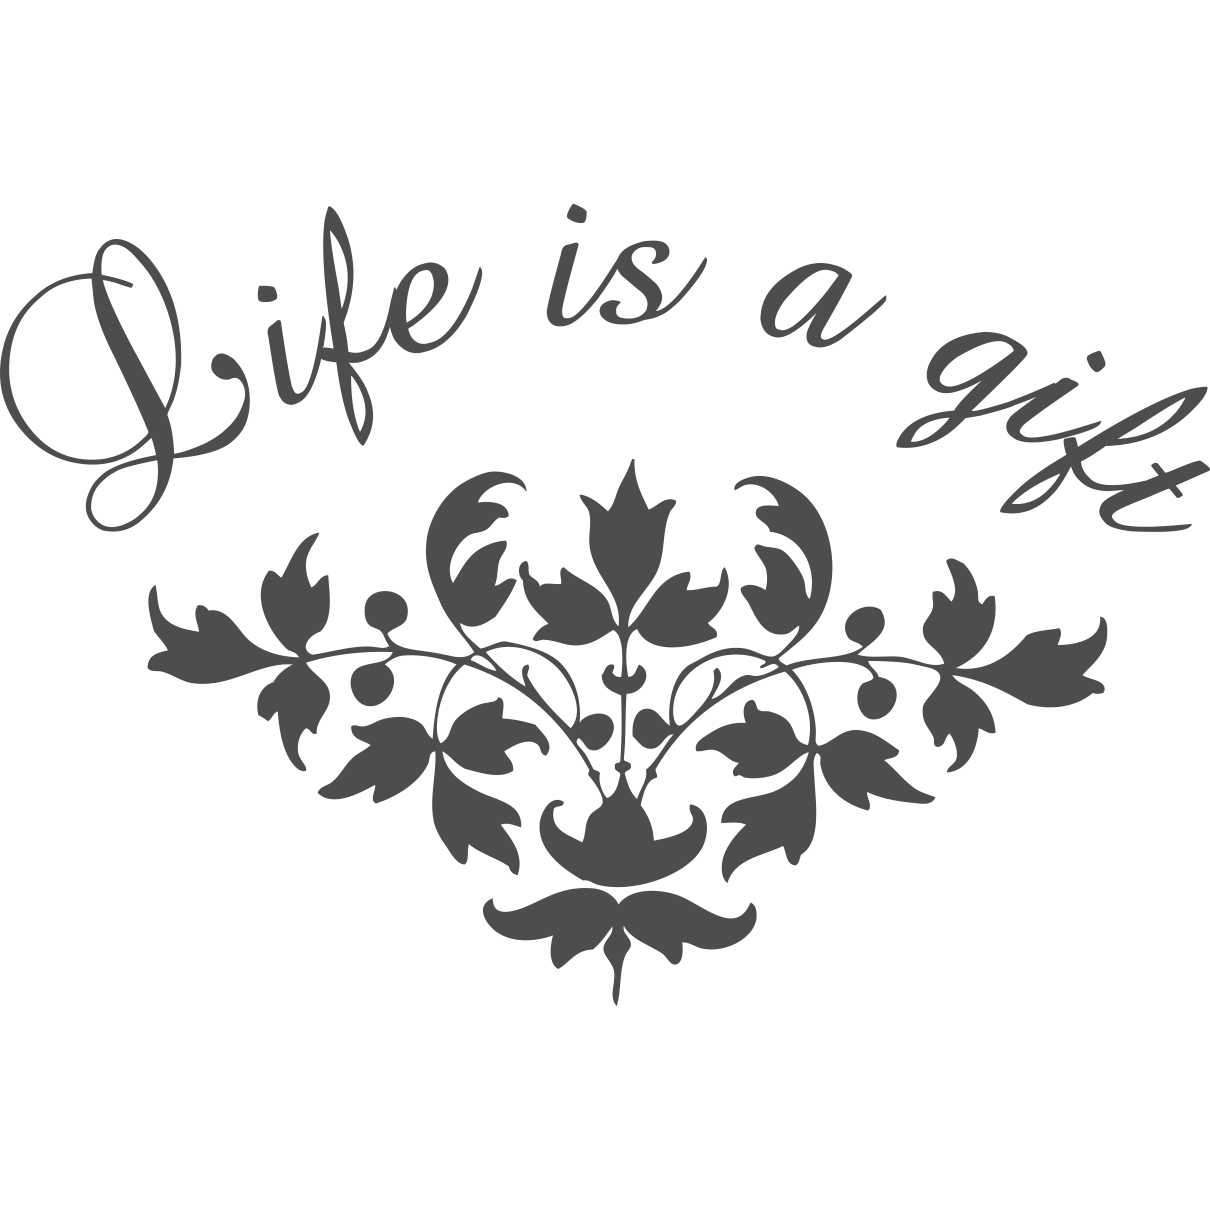 Sticker perete Life is a gift 1